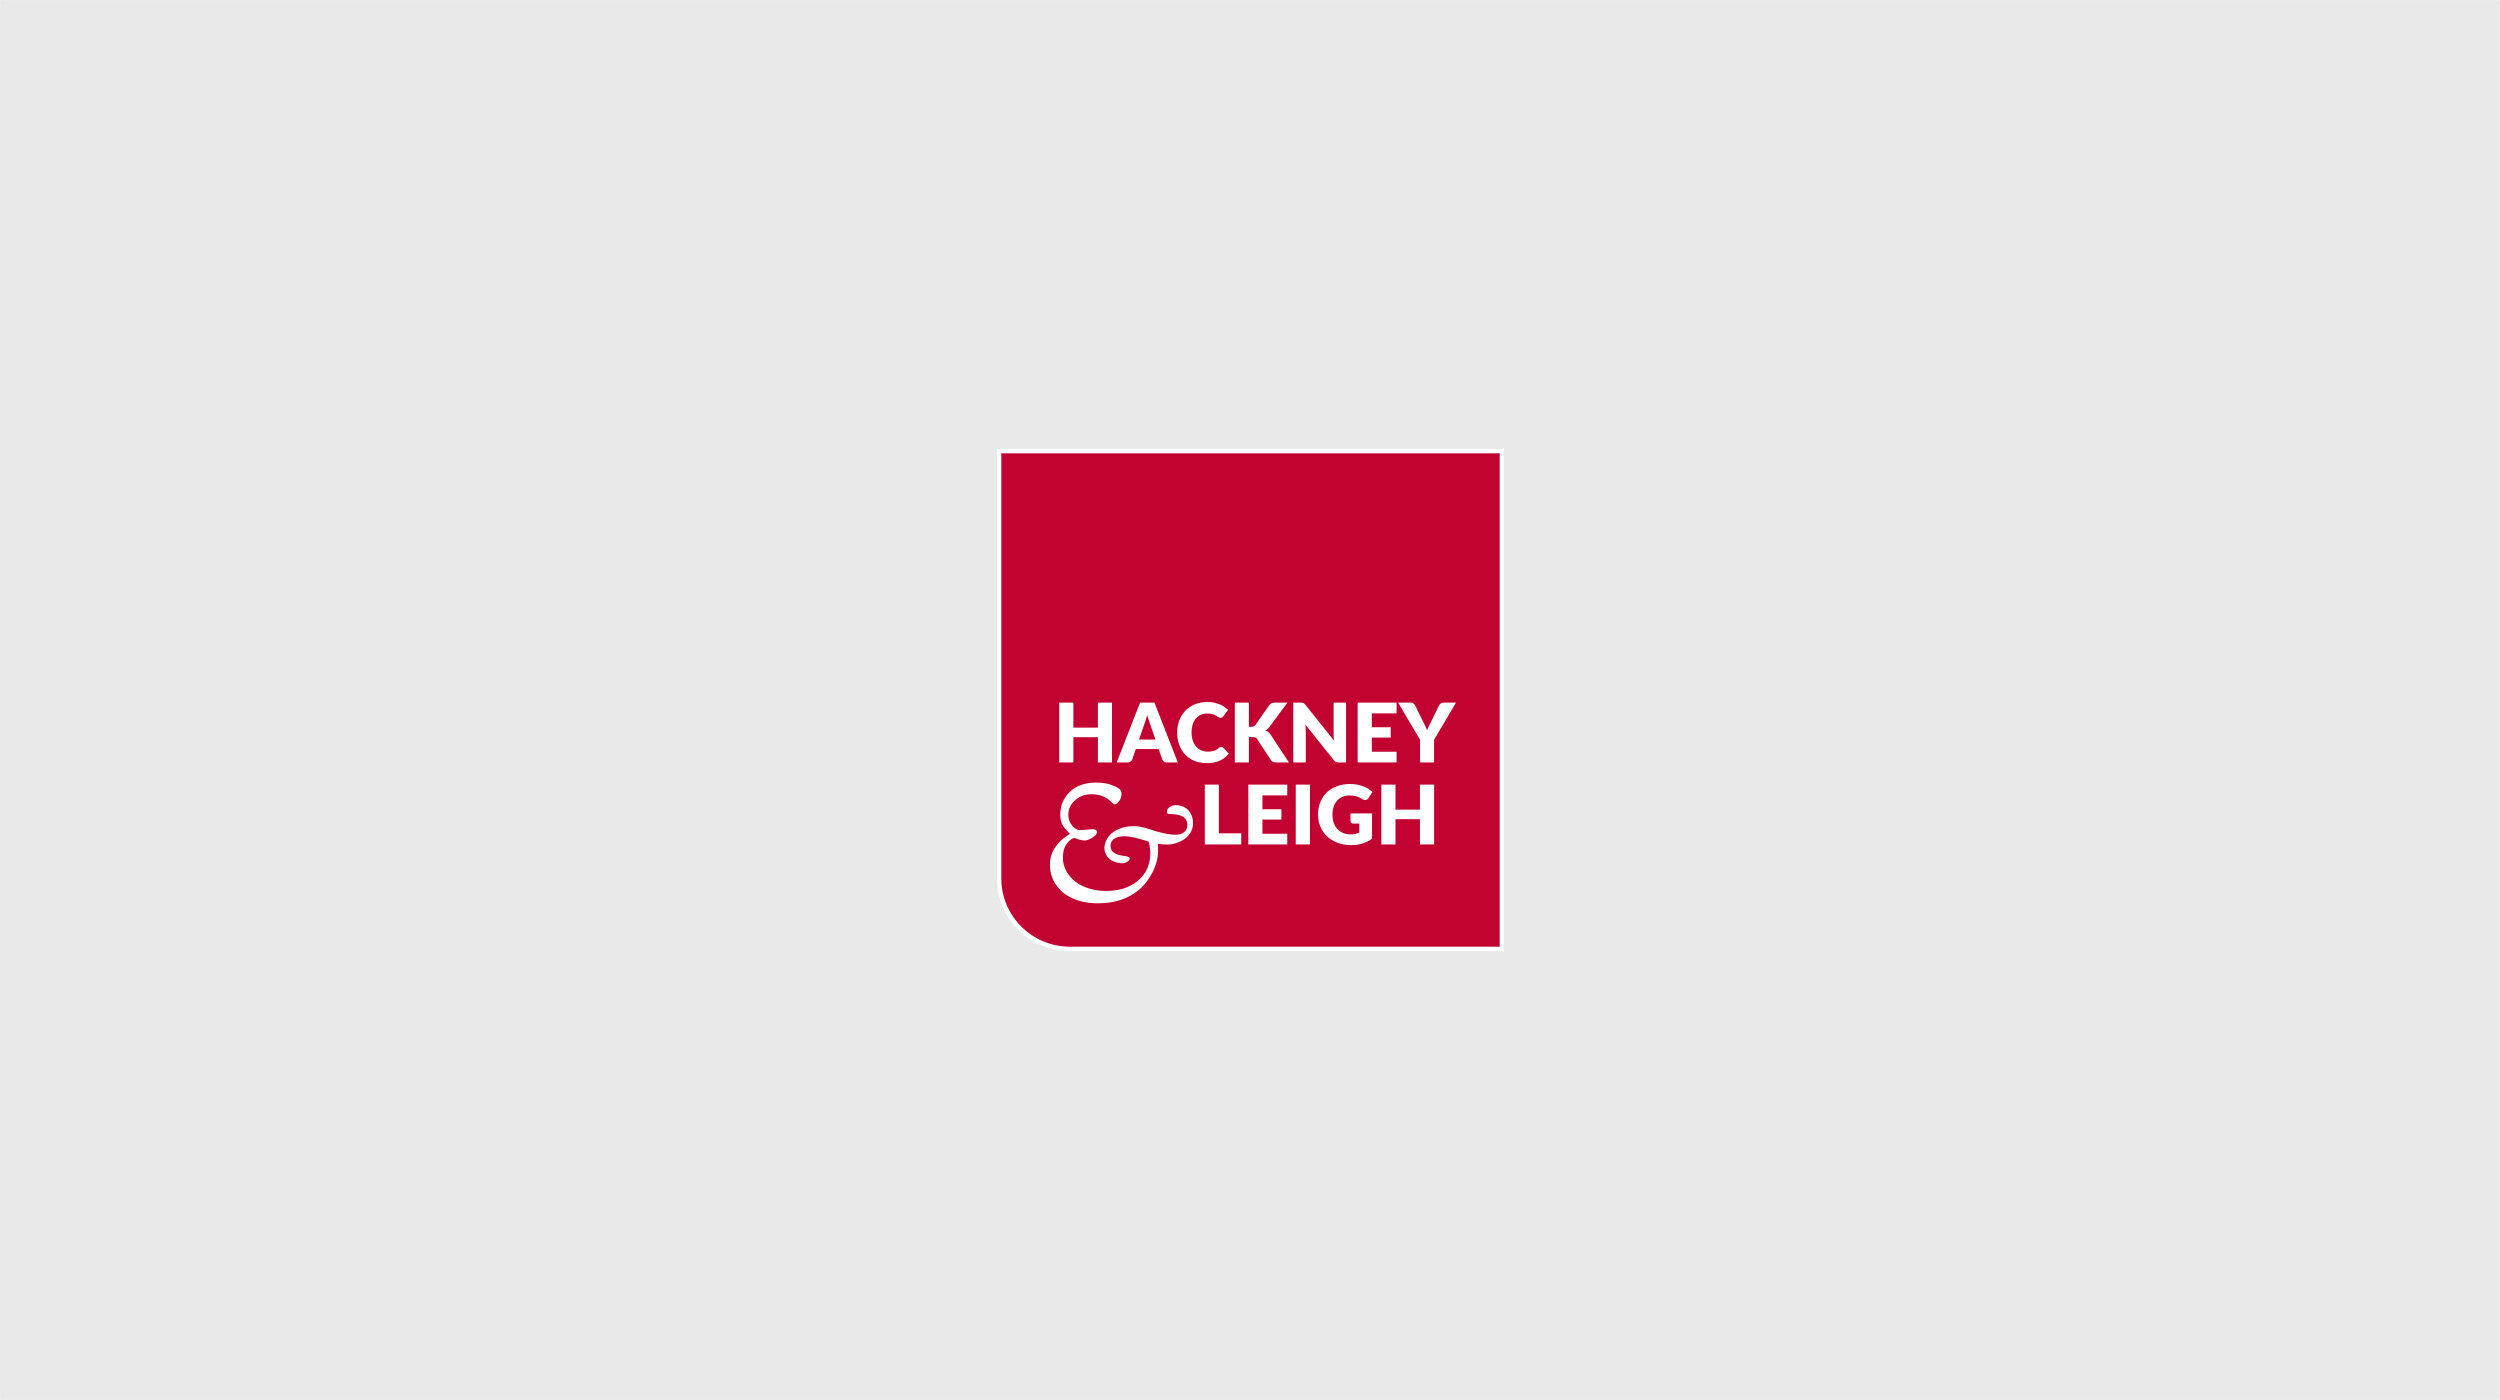 brand-strategy-design-hackney-and-leigh-the-brand-chap-10.jpeg